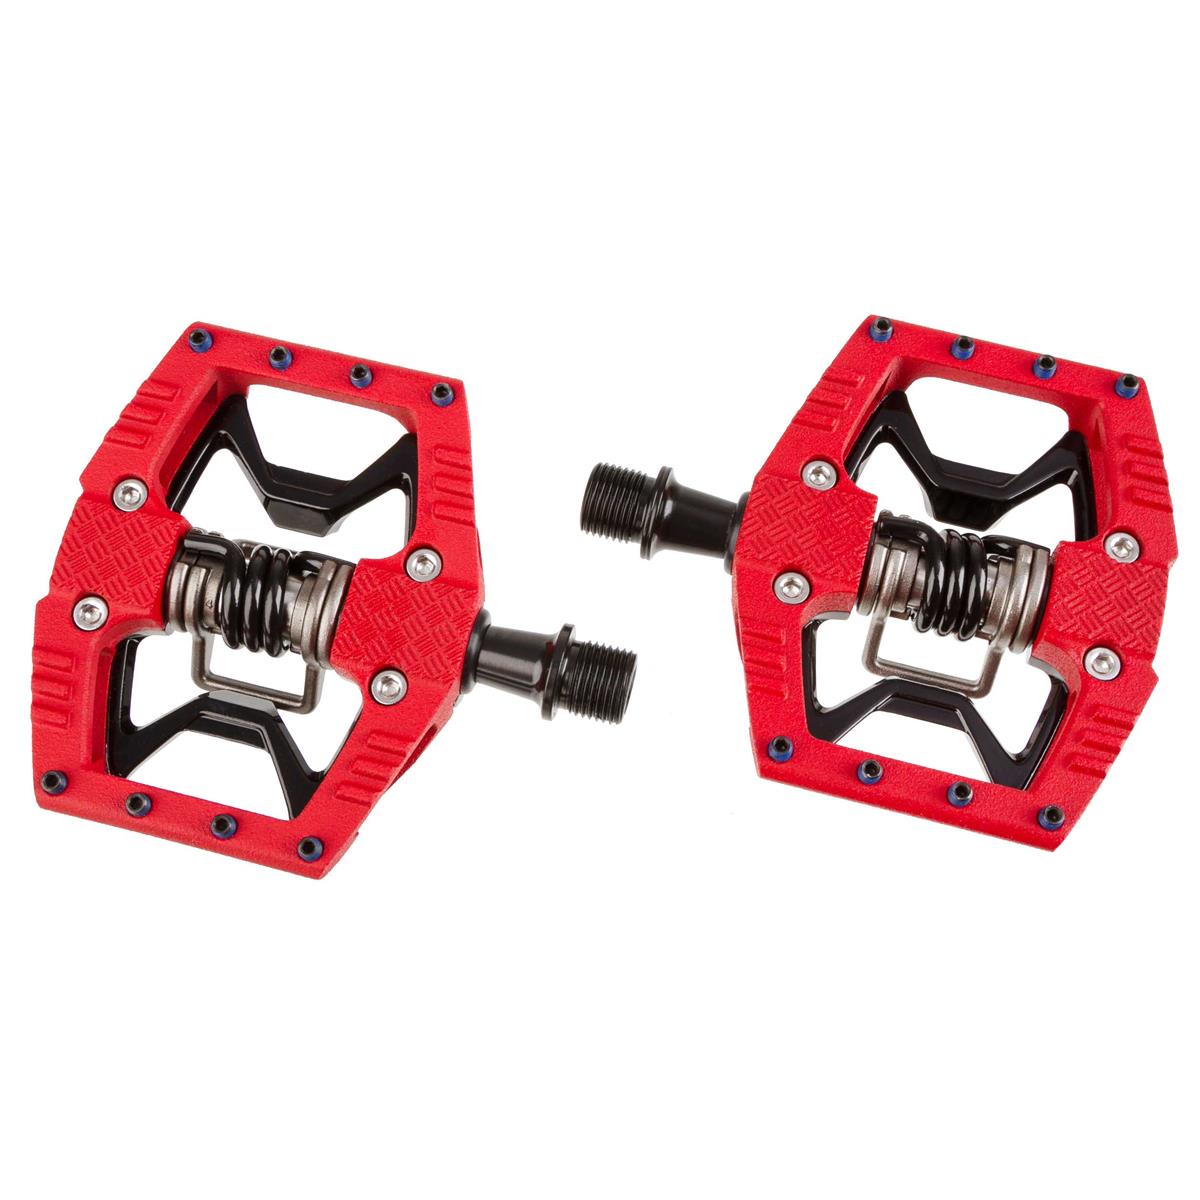 Crankbrothers Hybrid Pedals Double Shot 3 Black/Red